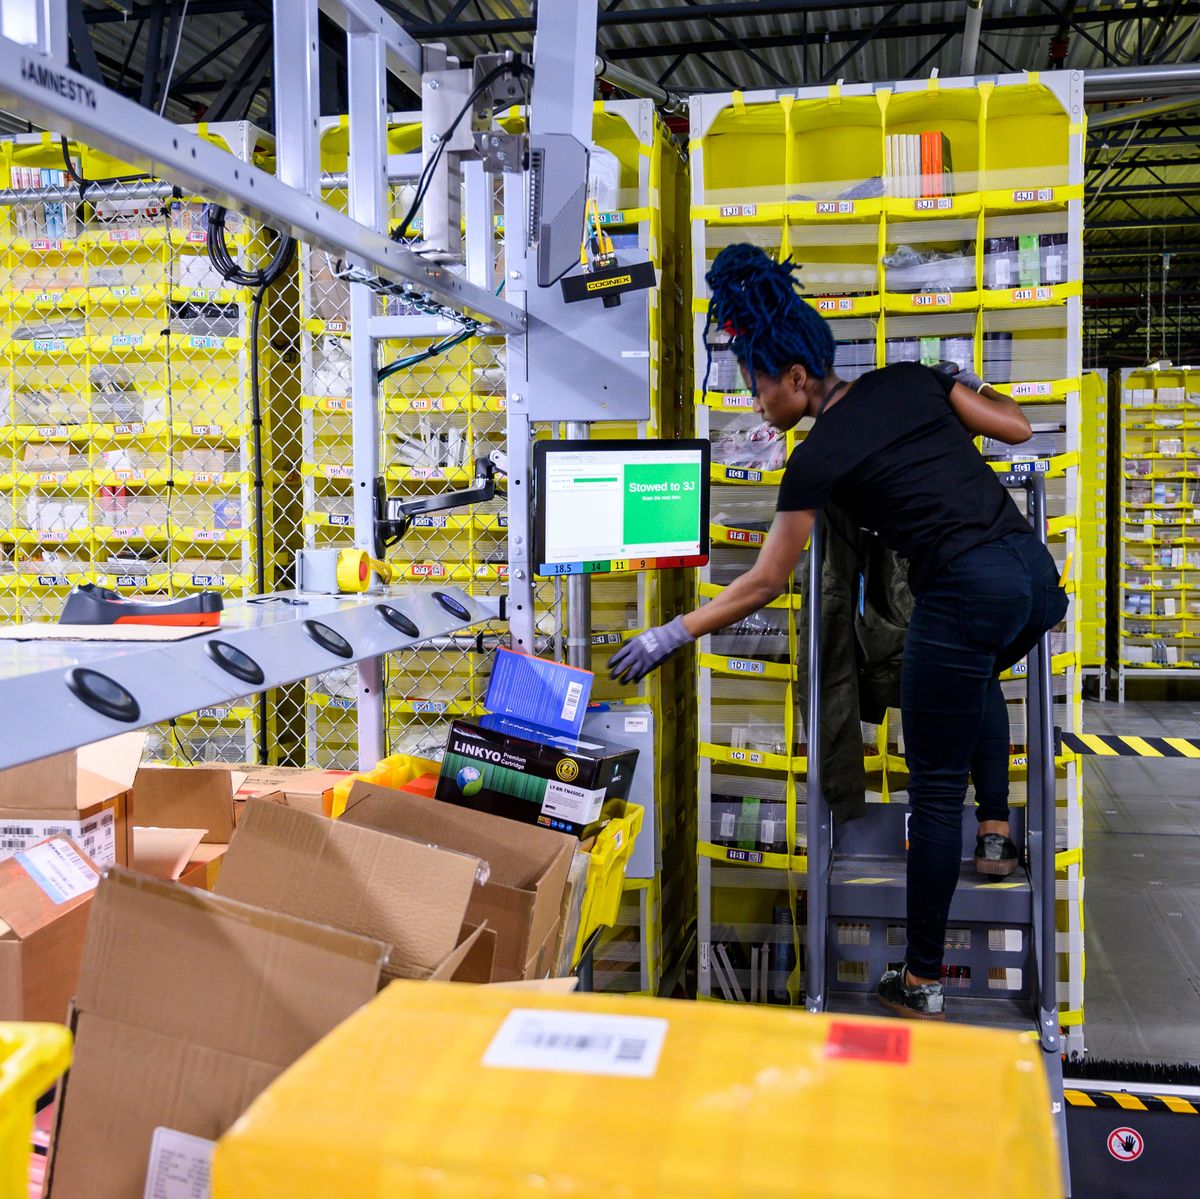 a woman works at a distrubiton station at the 855,000 square foot amazon fulfillment center in staten island, one of the five boroughs of new york city, on february 5, 2019   inside a huge warehouse on staten island thousands of robots are busy distributing thousands of items sold by the giant of online sales, amazon photo by johannes eisele  afp        photo credit should read johannes eiseleafp via getty images